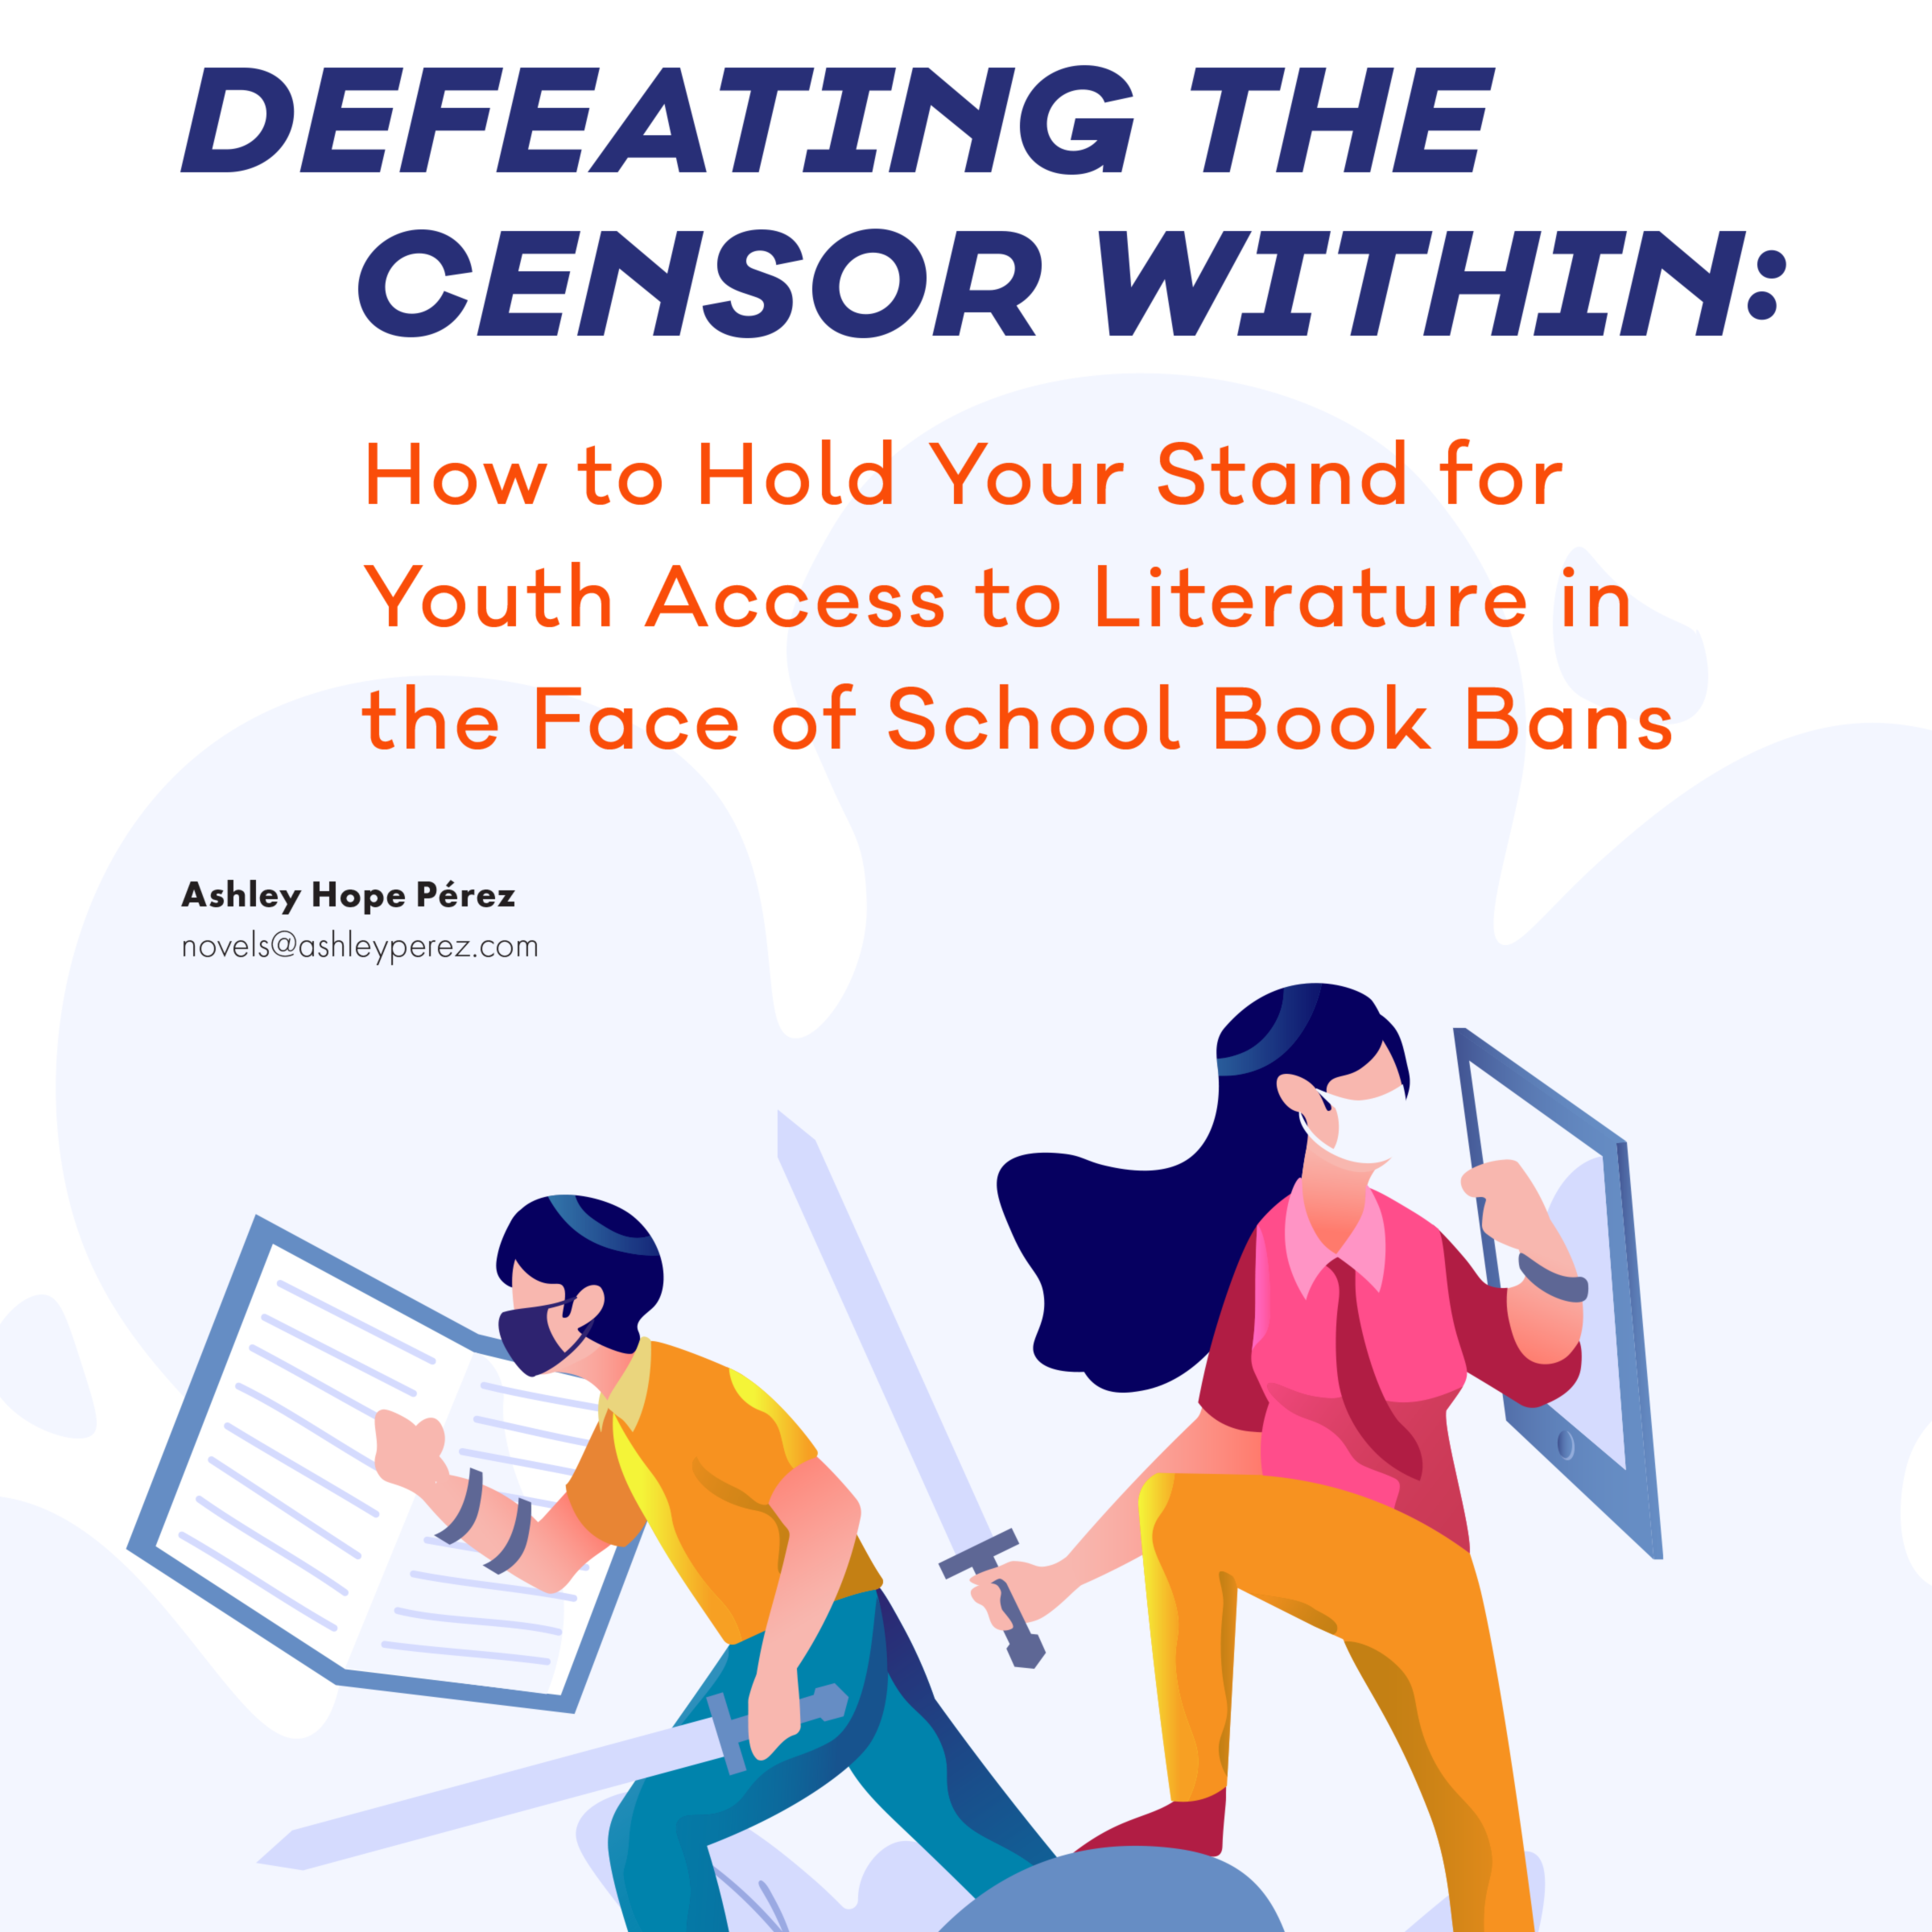 Defeating the Censor Within: How to Hold Your Stand for Youth Access to Literature in the Face of School Book Bans (Volume 50, No.5, pgs 34-39)